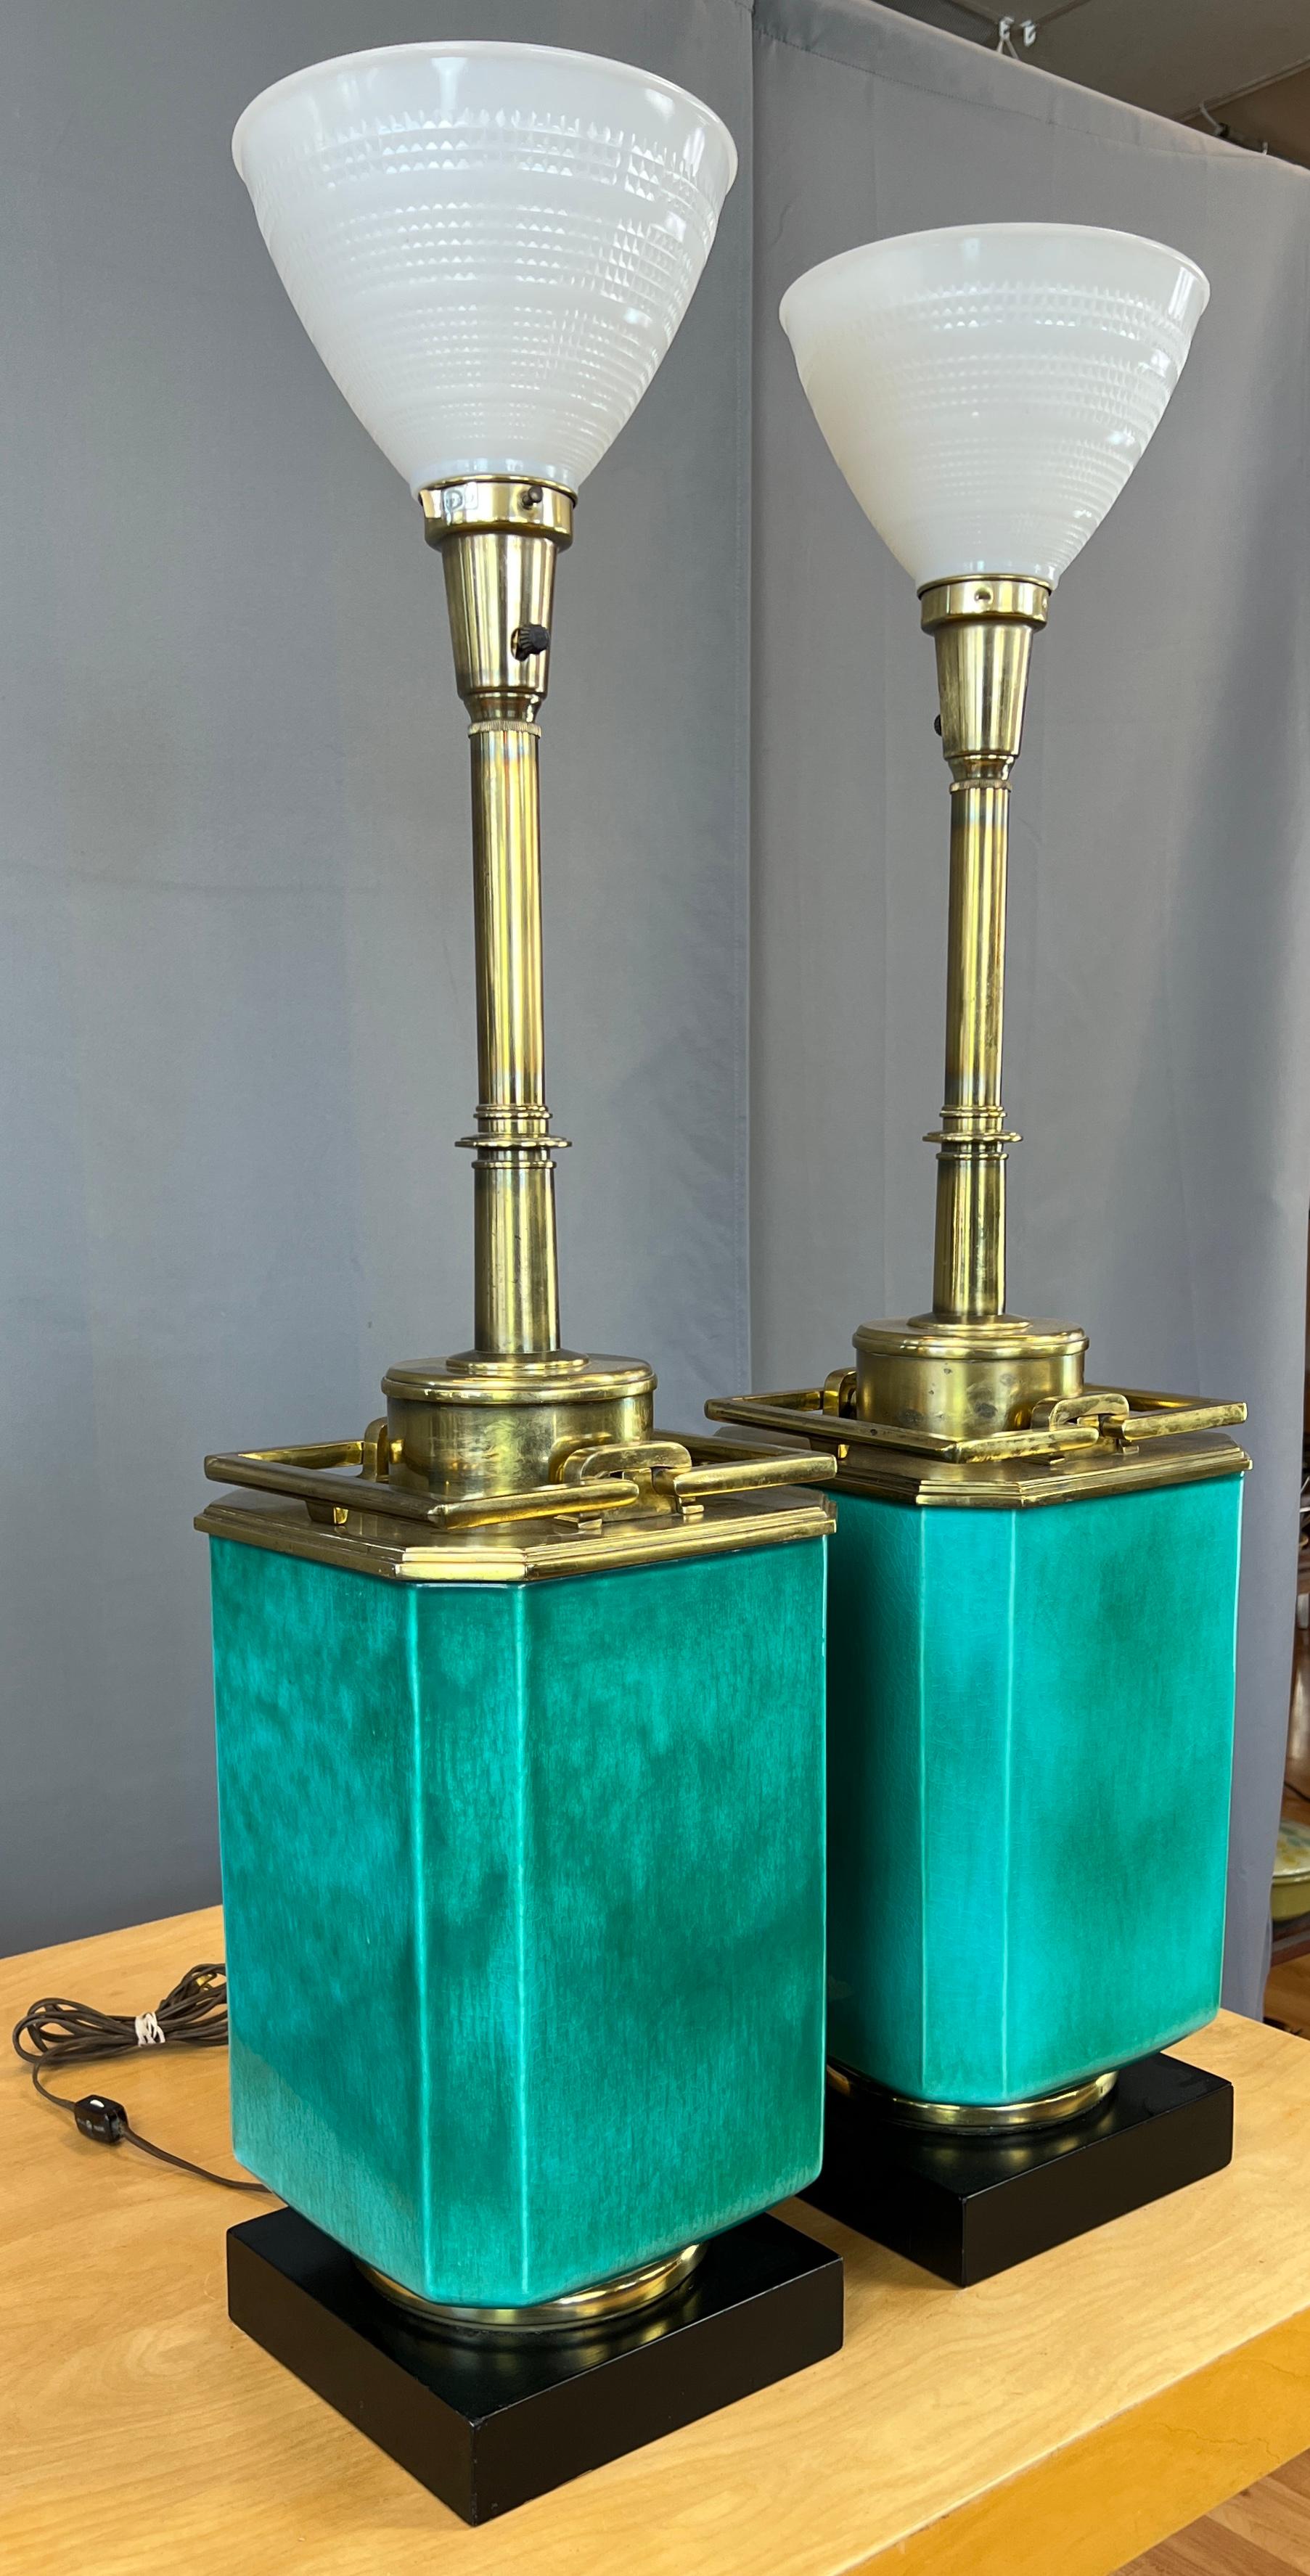 A monumental pair of Turquoise and Brass table lamps by Edwin Cole for Stiffel.
Starts with a black wooden square pedestal with a brass ring above, sitting on the ring is the large Turquoise ceramic main body.
On top of the main body is the solid